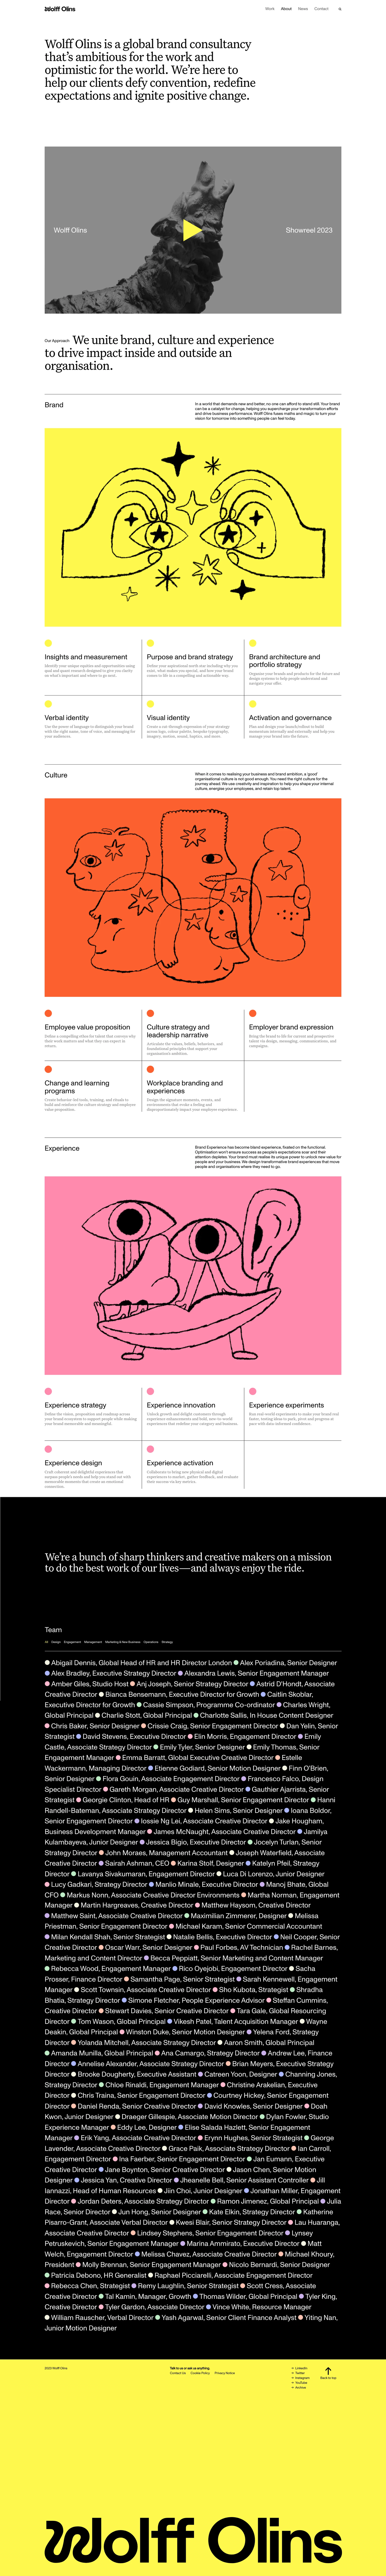 Wolff Olins Landing Page Example: We create transformative brands that move organisations, people and the world forward.